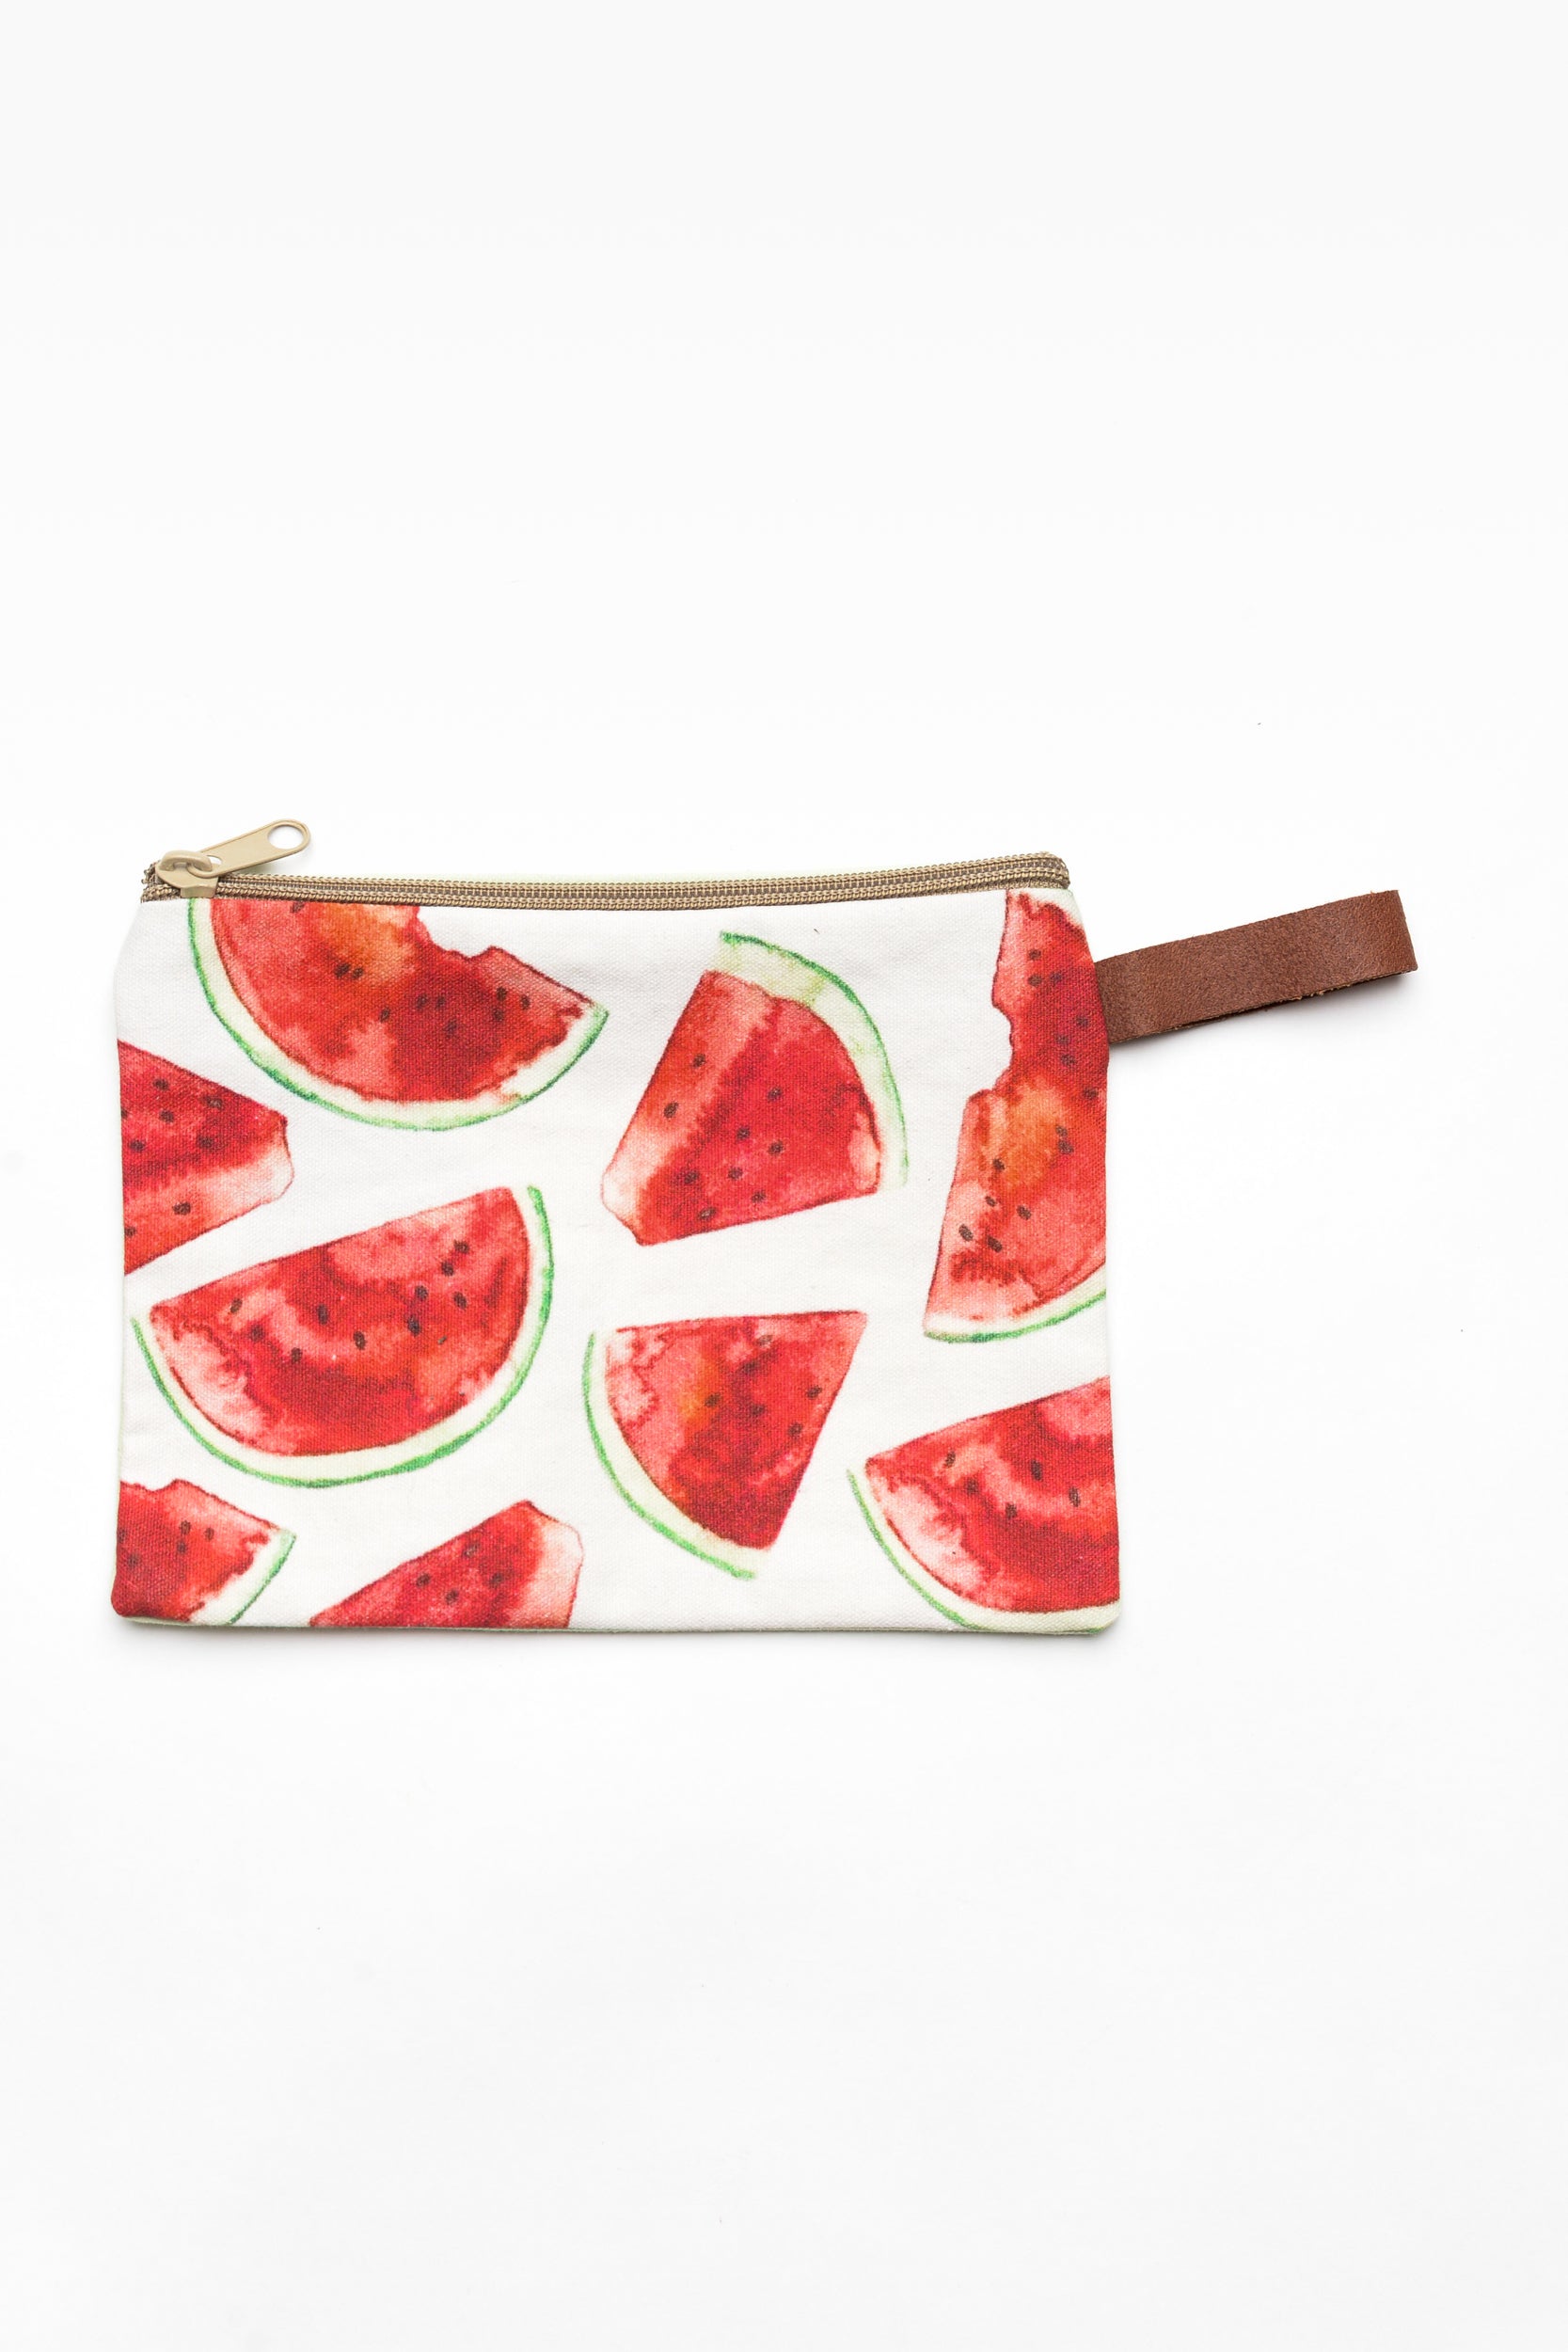 Plush Watermelon Fruit Coin Neoprene Bags 10 Fashionable Styles For School  Kids Small Neoprene Bag Case Popular Coin Purses And Gifts From  Backintimeshop1970, $0.66 | DHgate.Com